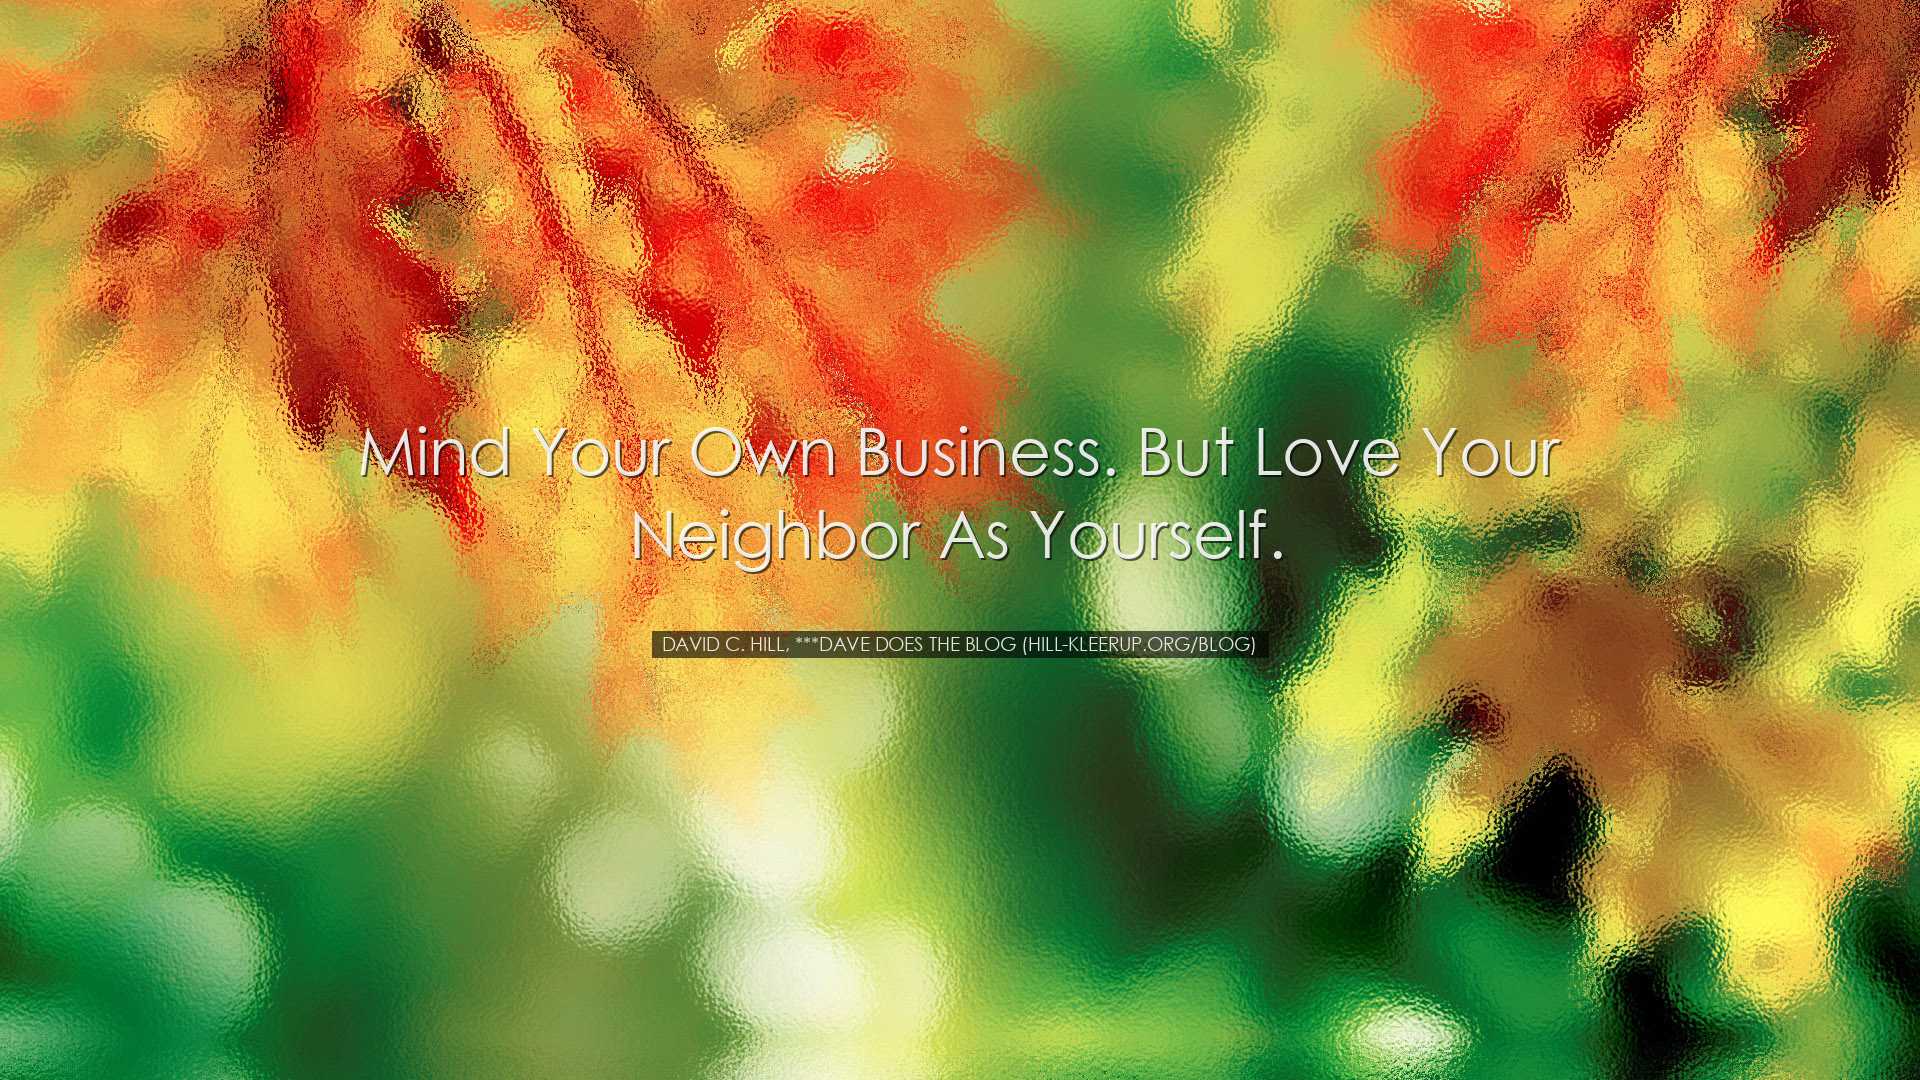 Mind your own business. But love your neighbor as yourself. - Davi